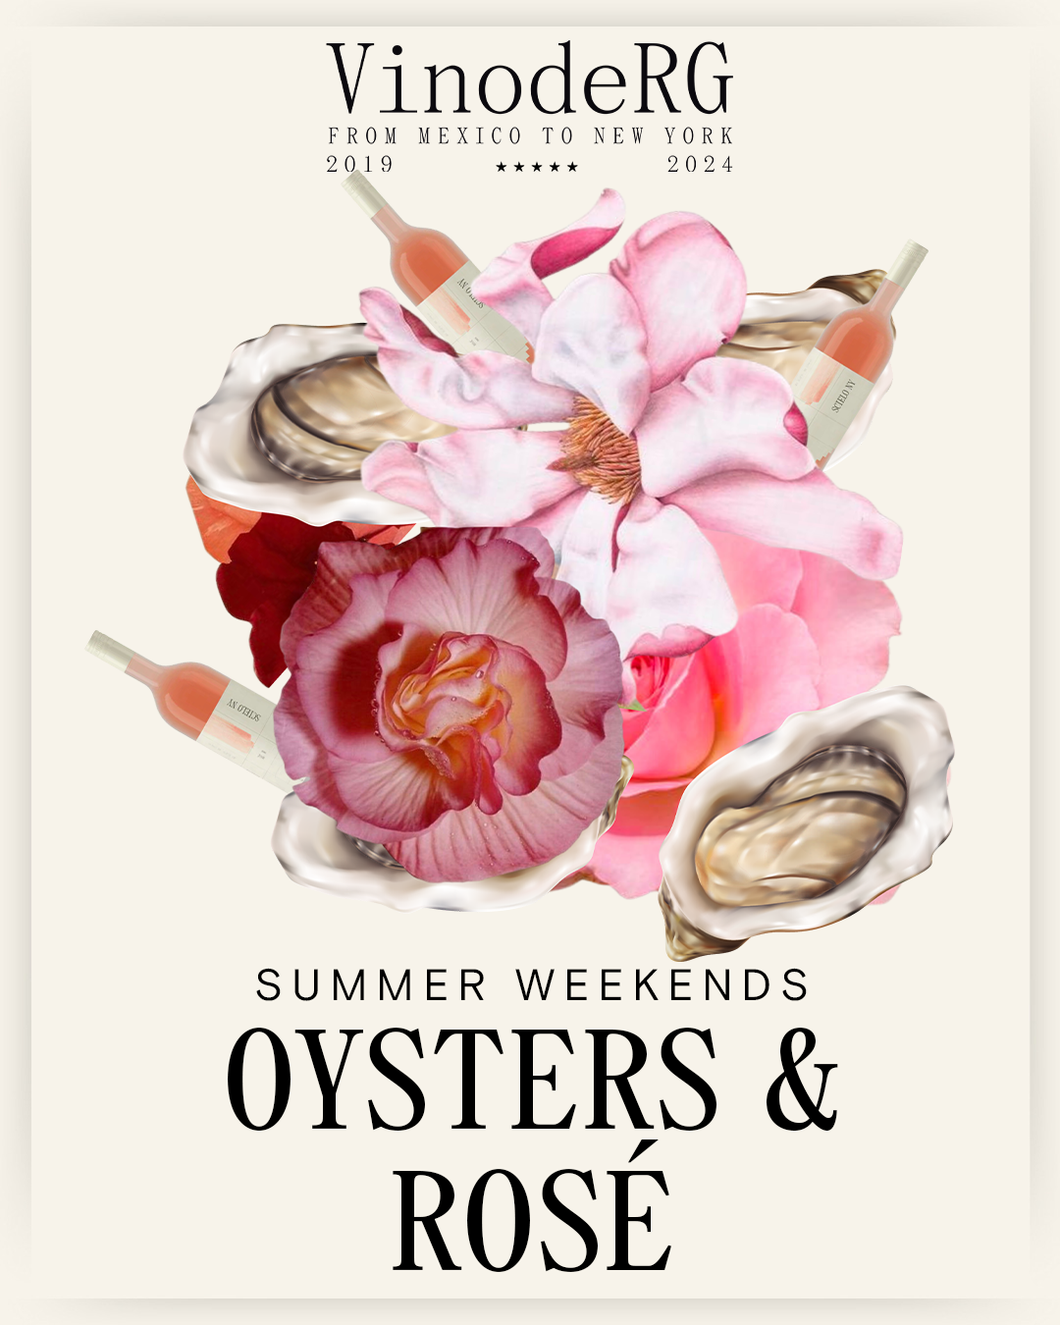 Oysters & Rosé